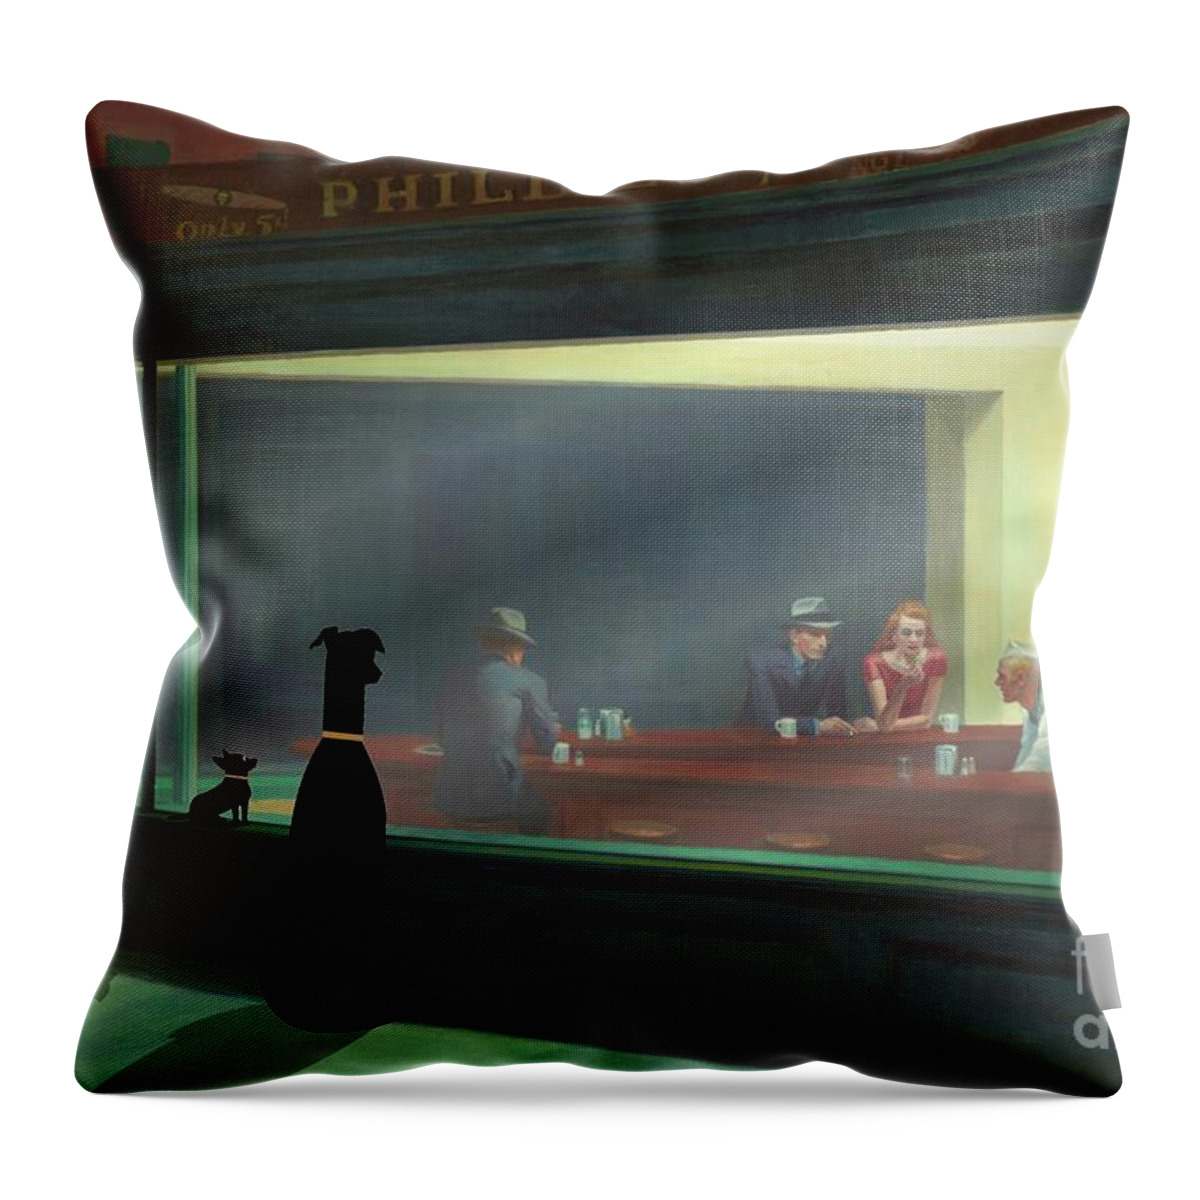 Nighthawks Throw Pillow featuring the digital art Dogs Peer Into Nighthawks Diner by Donna Mibus